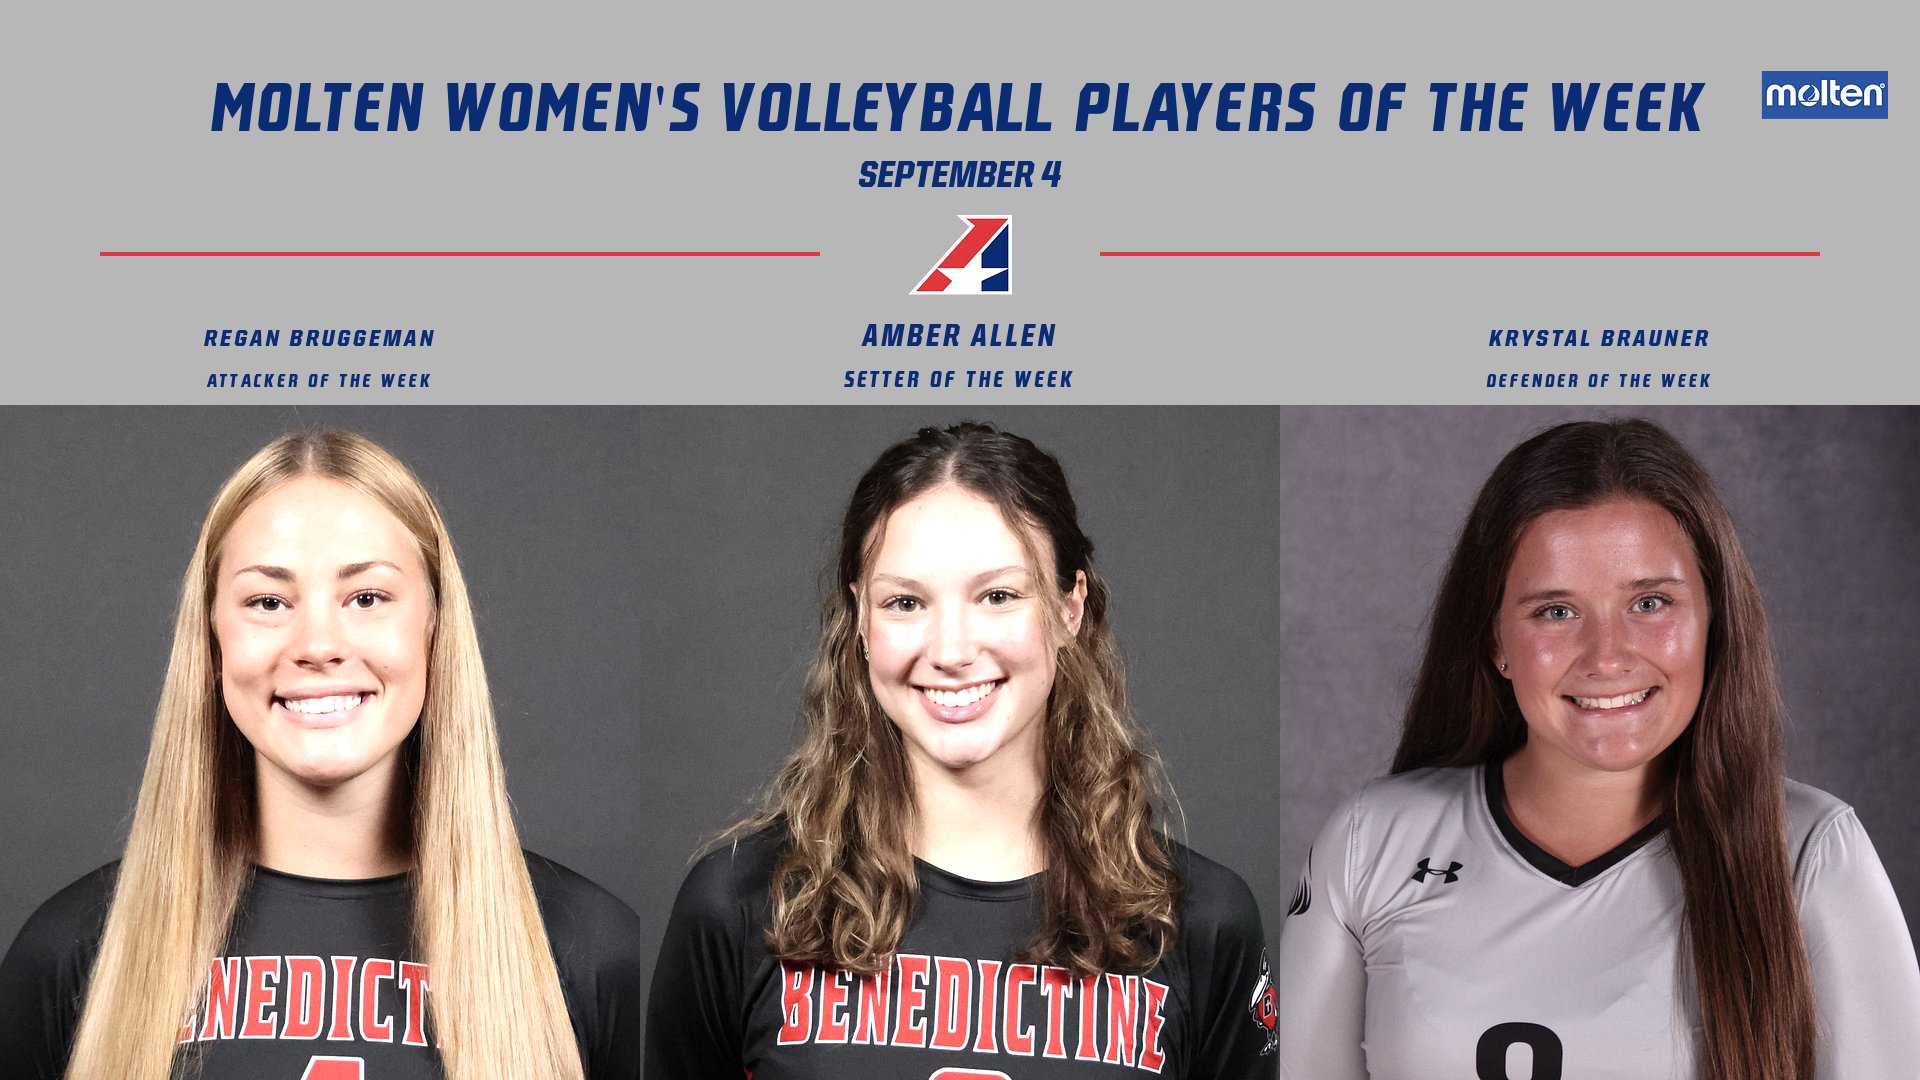 Heart Announces Molten Women’s Volleyball Players of the Week